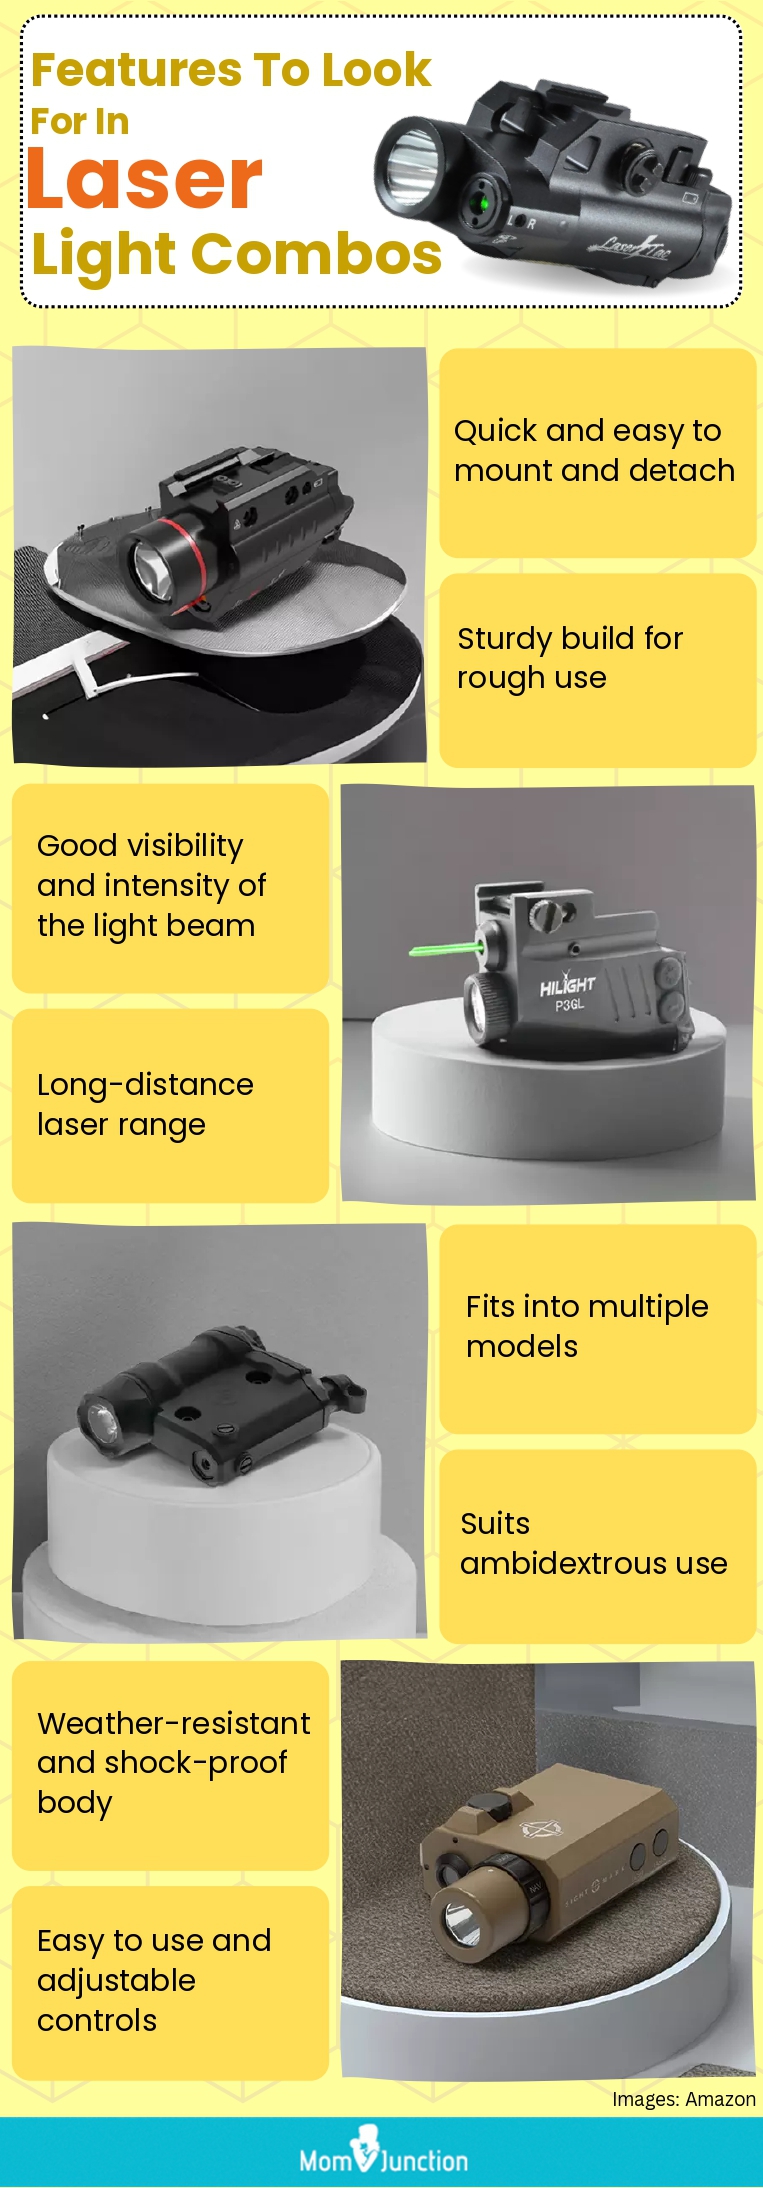 Features To Look For In Laser Light Combos (infographic)